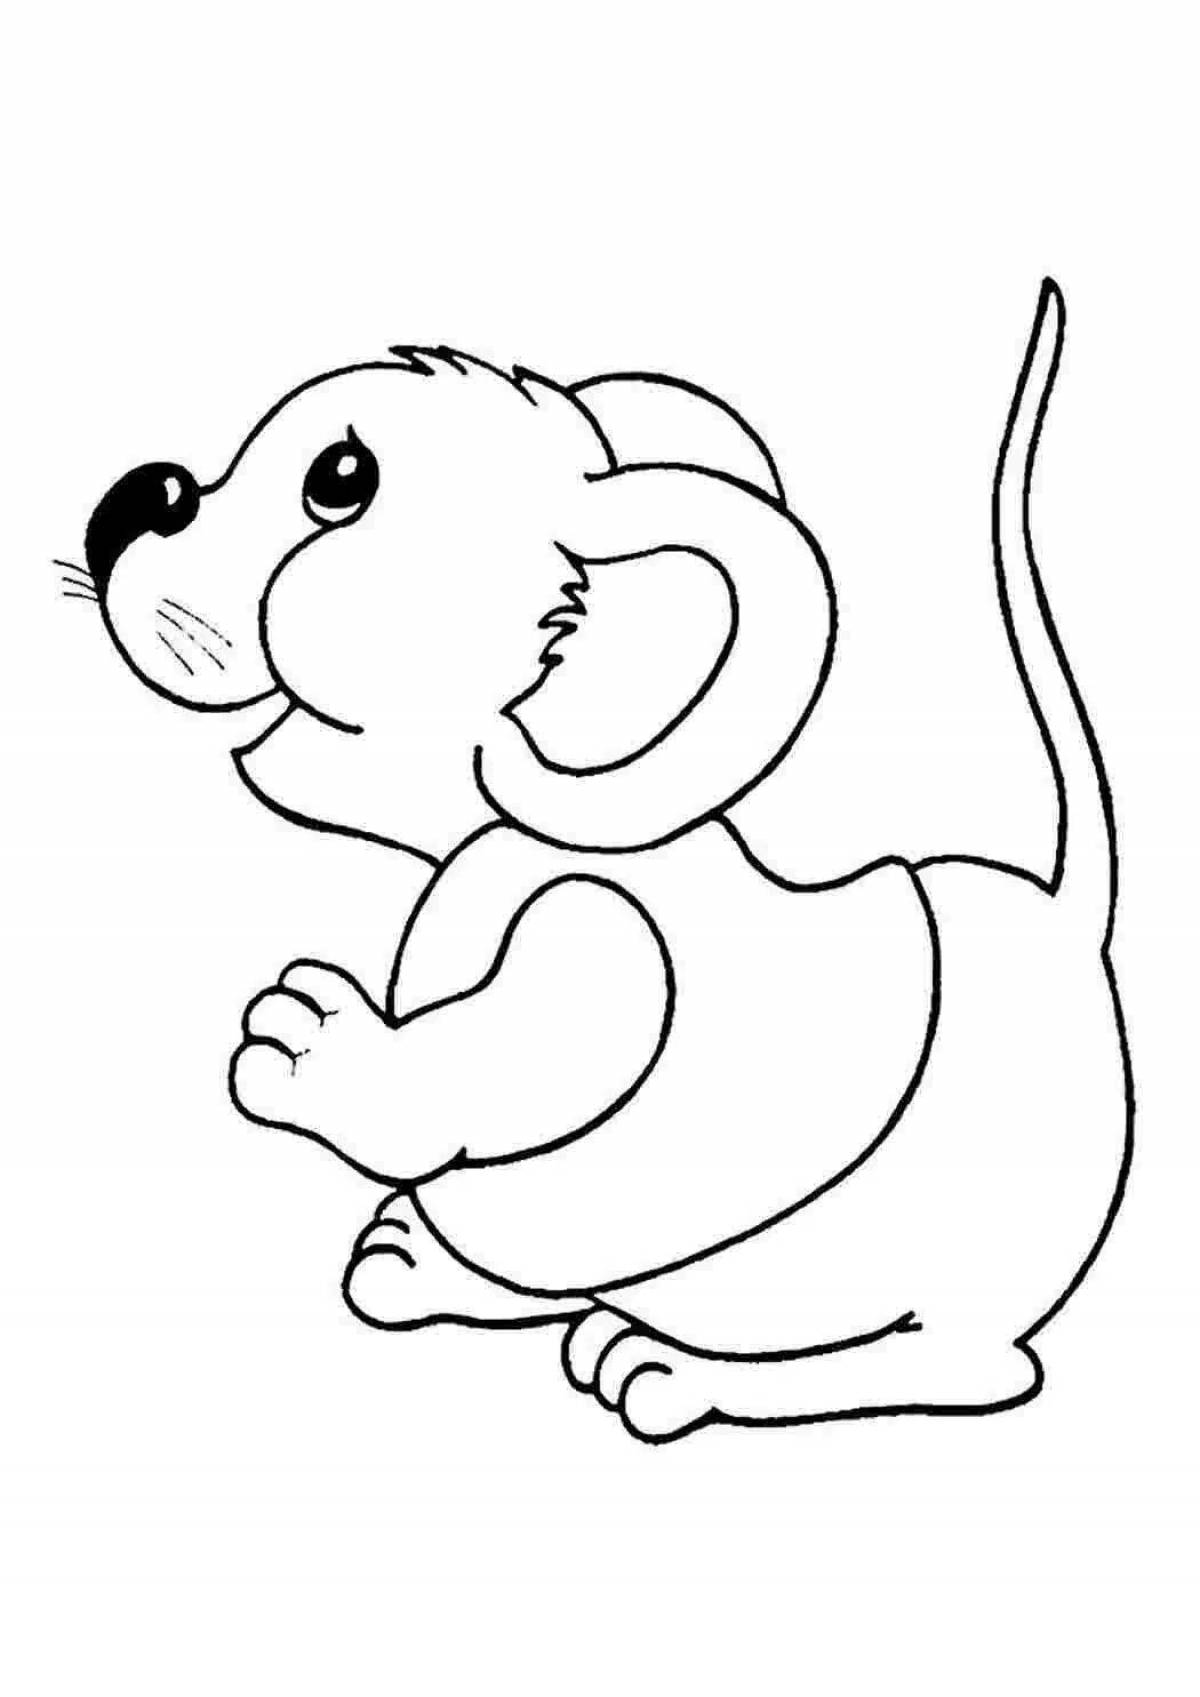 Cute mouse and bear coloring pages